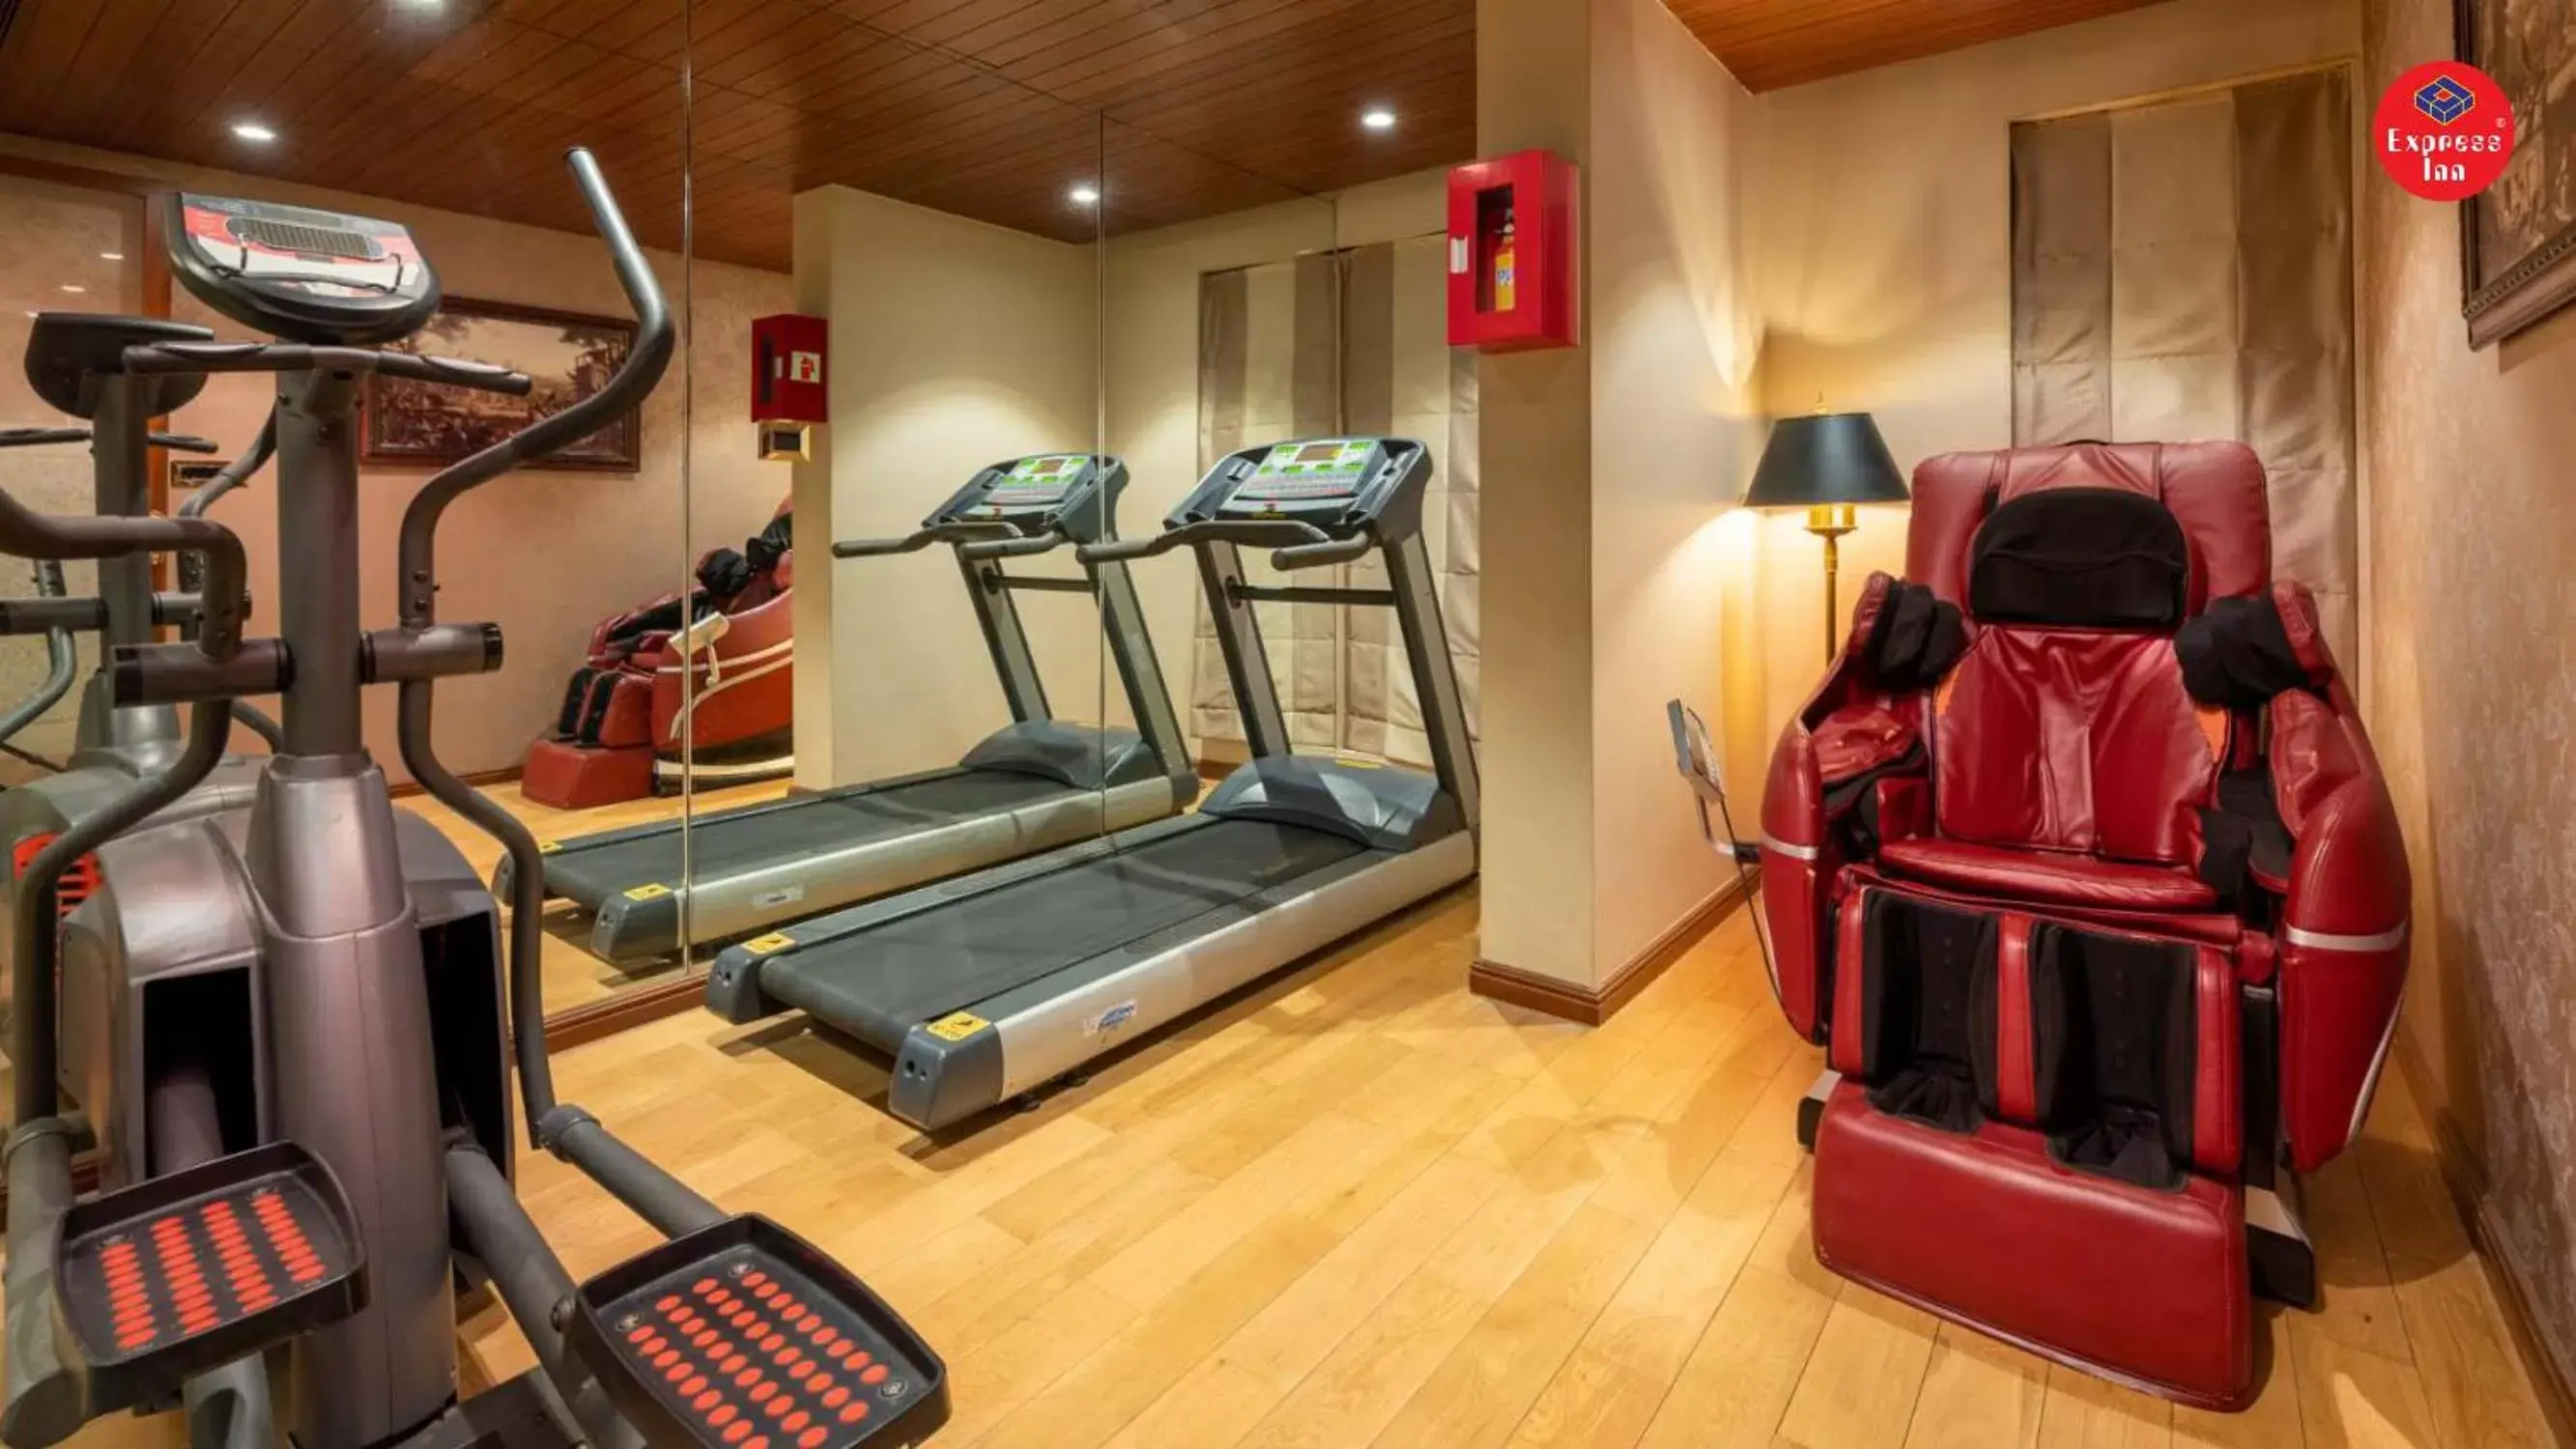 Fitness centre/facilities, Fitness Center/Facilities in Express Inn The Business Luxury Hotel